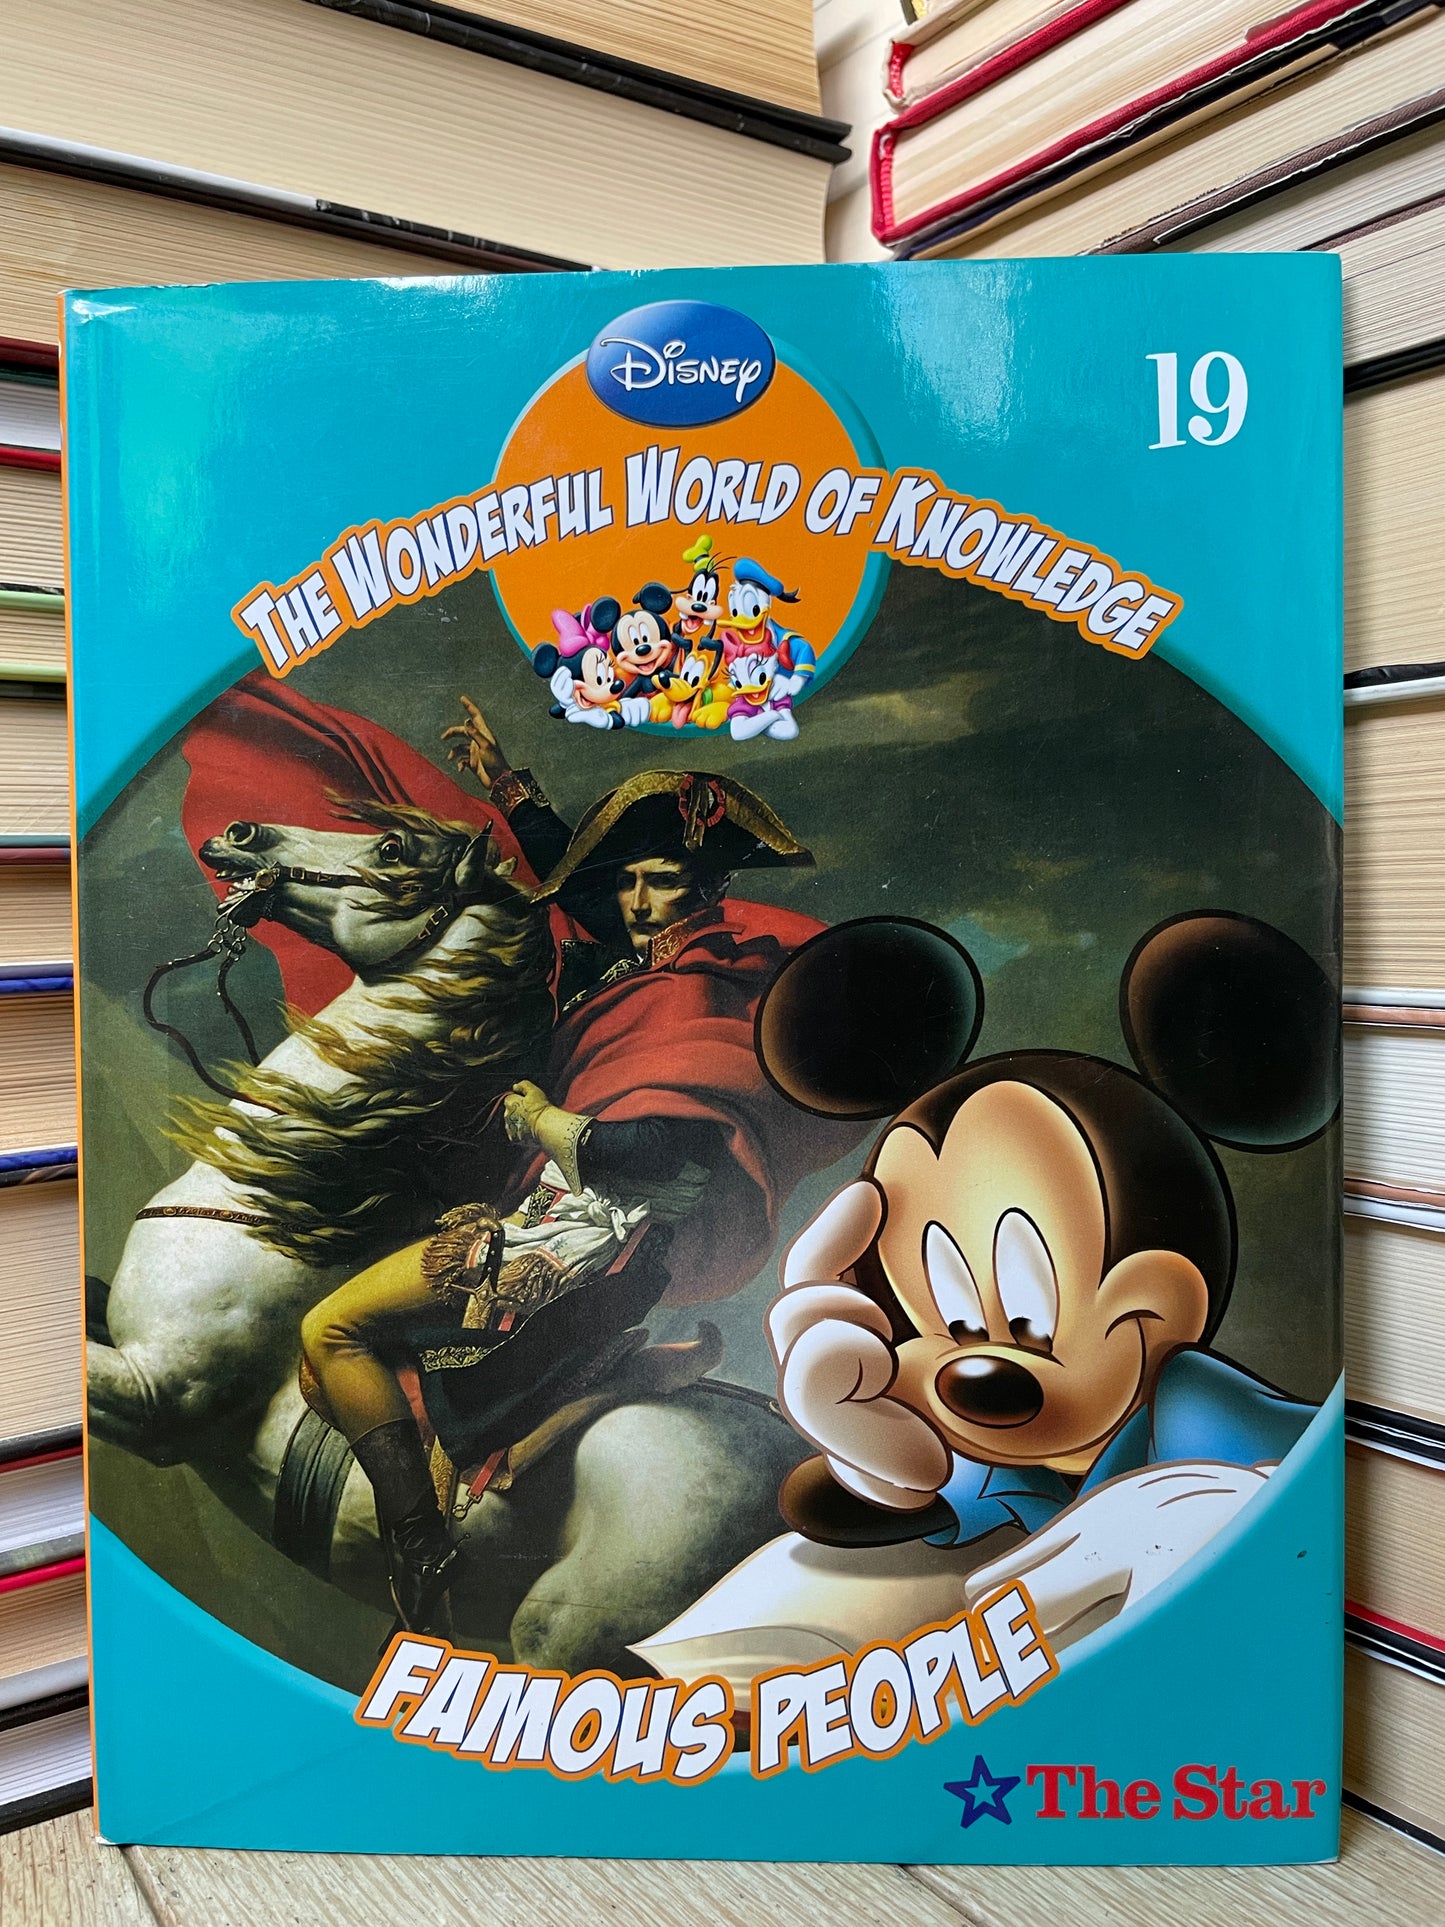 Disney - The Wonderful World of Knowledge: Famous People